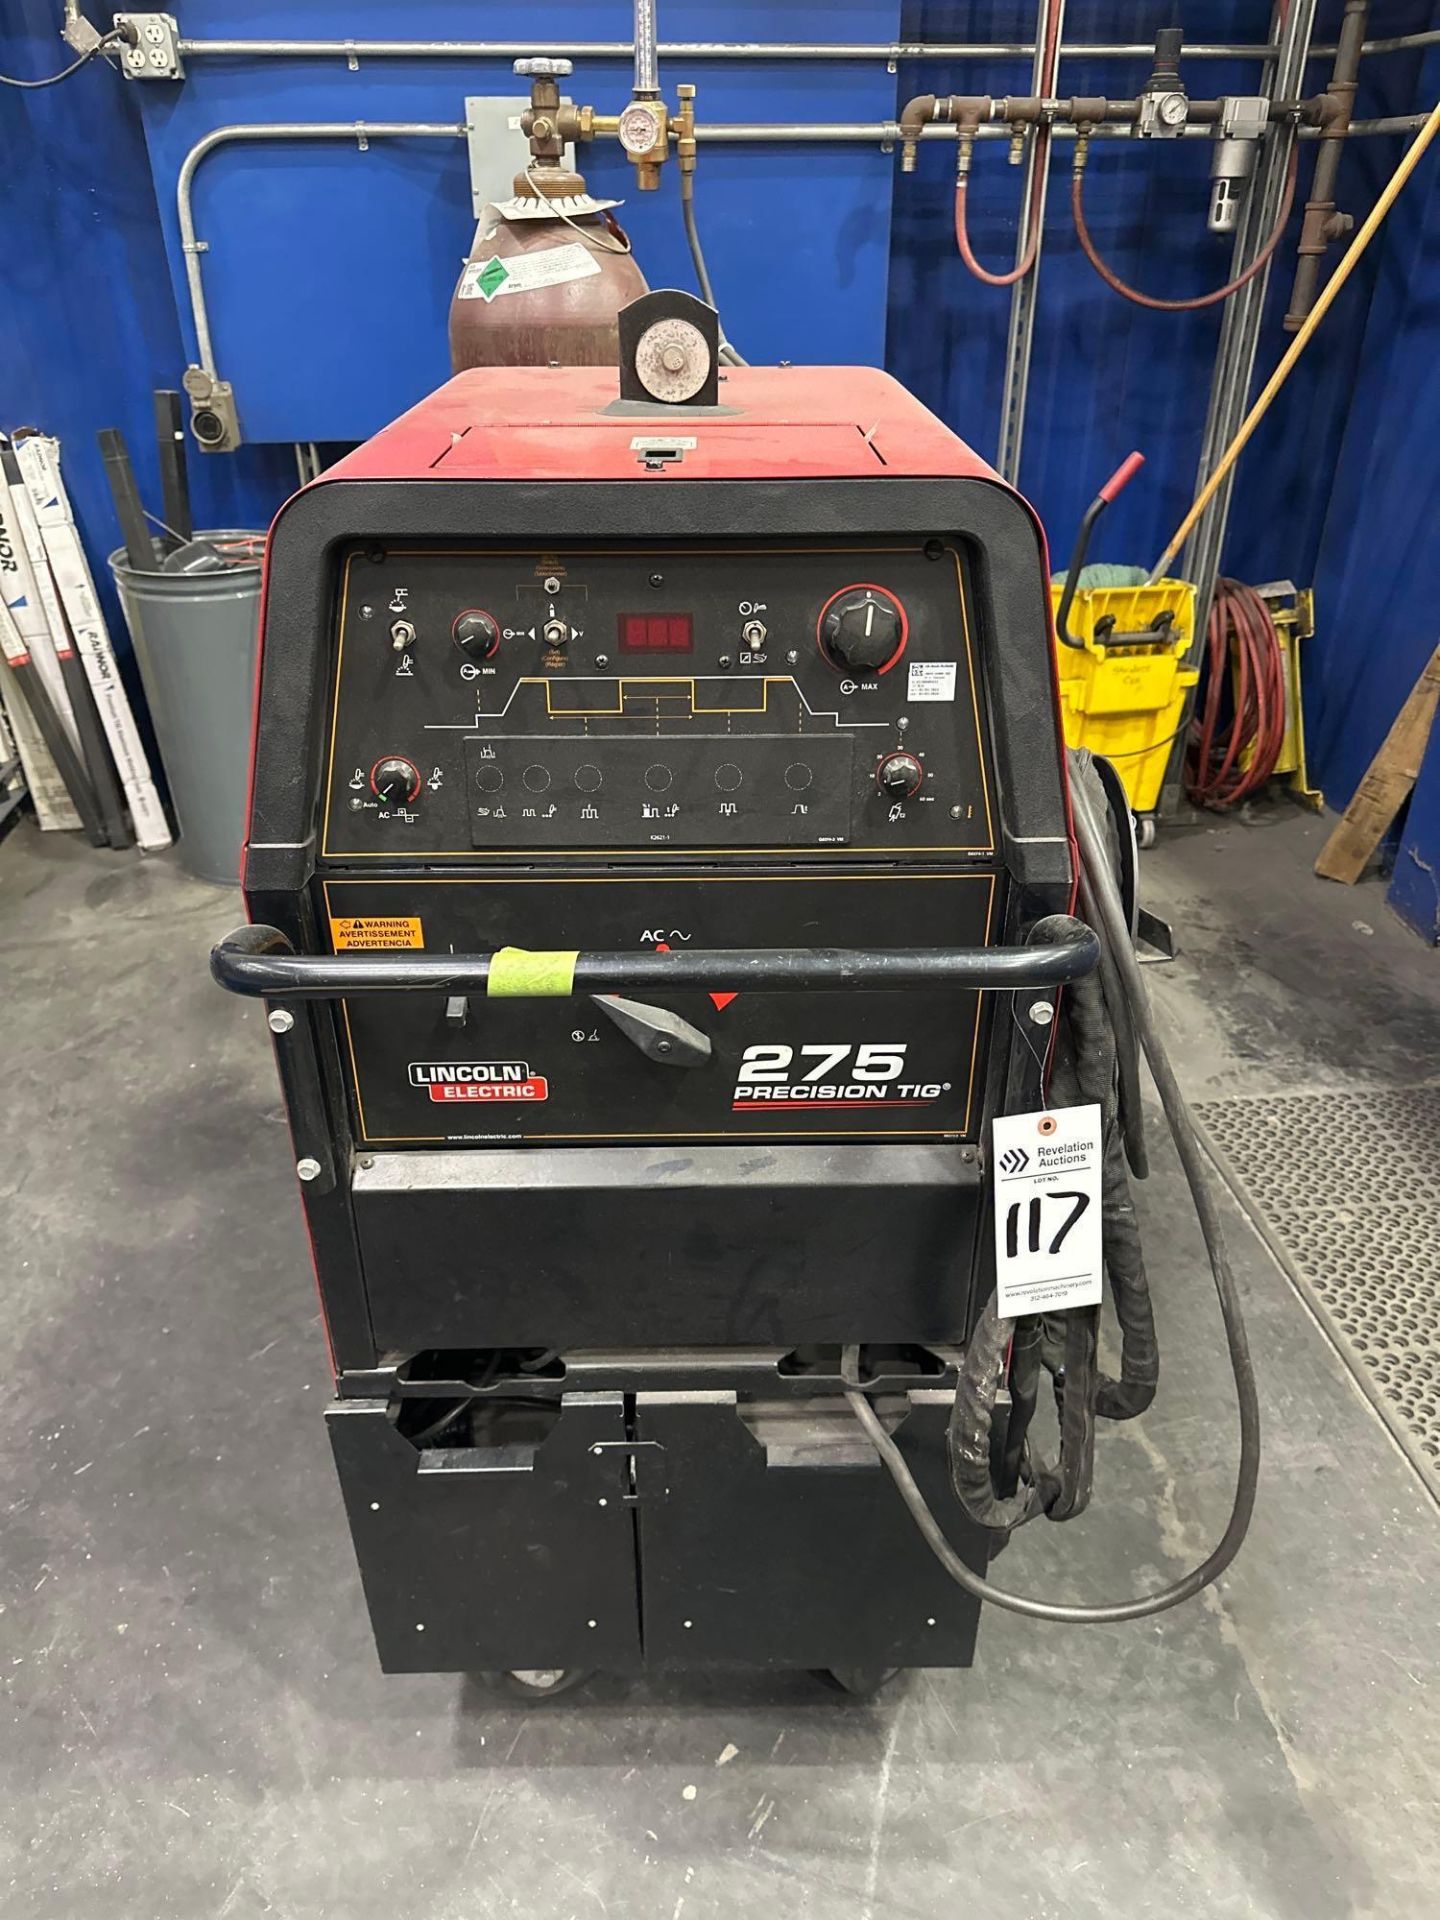 LINCOLN ELECTRIC 275 PRECISION TIG WELDER WITH ASSORTED WELDING RODS